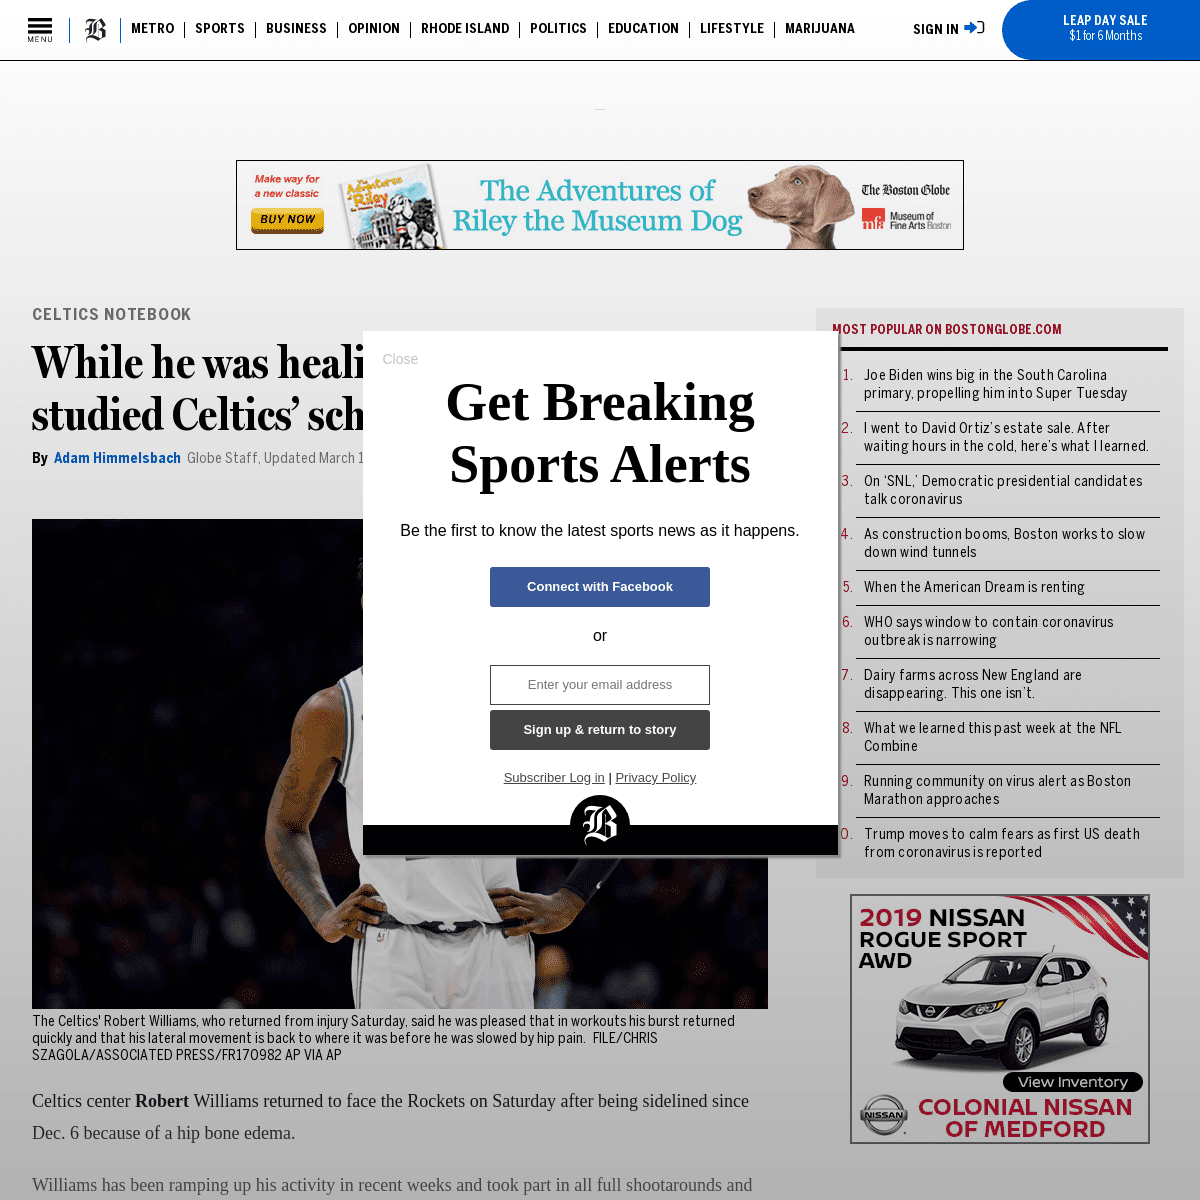 A complete backup of www.bostonglobe.com/sports/celtics/2020/02/29/while-was-healing-robert-williams-studied-celtics-schemes/Fgb